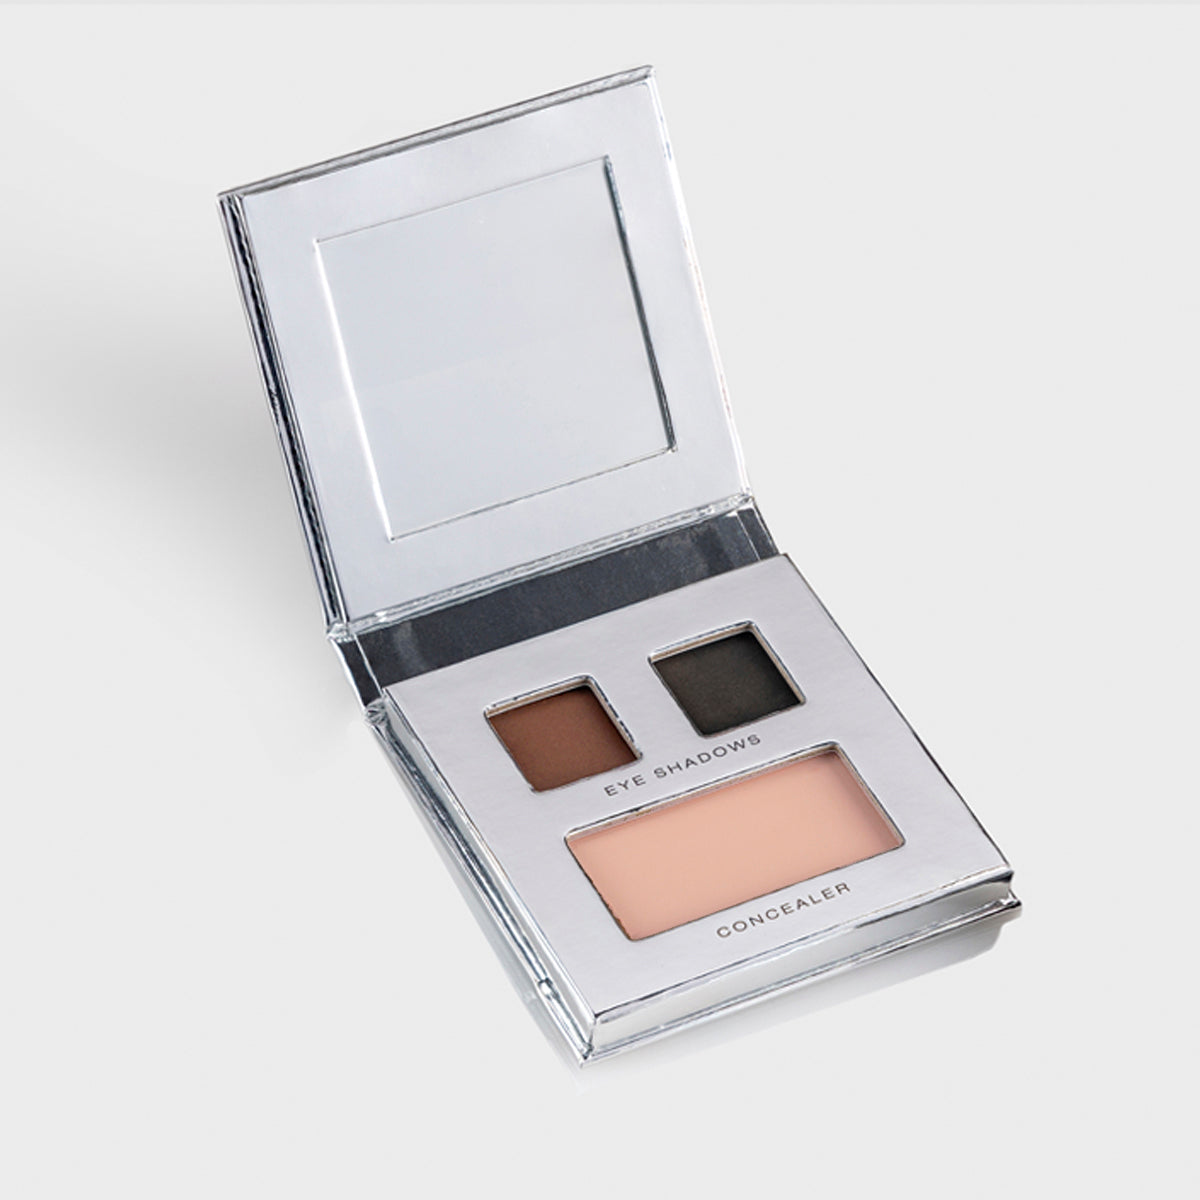 Fold Out Eyes Palette with Brown & Black Eyeshadow with concealer. Includes a mirror. In shade peaches n cream